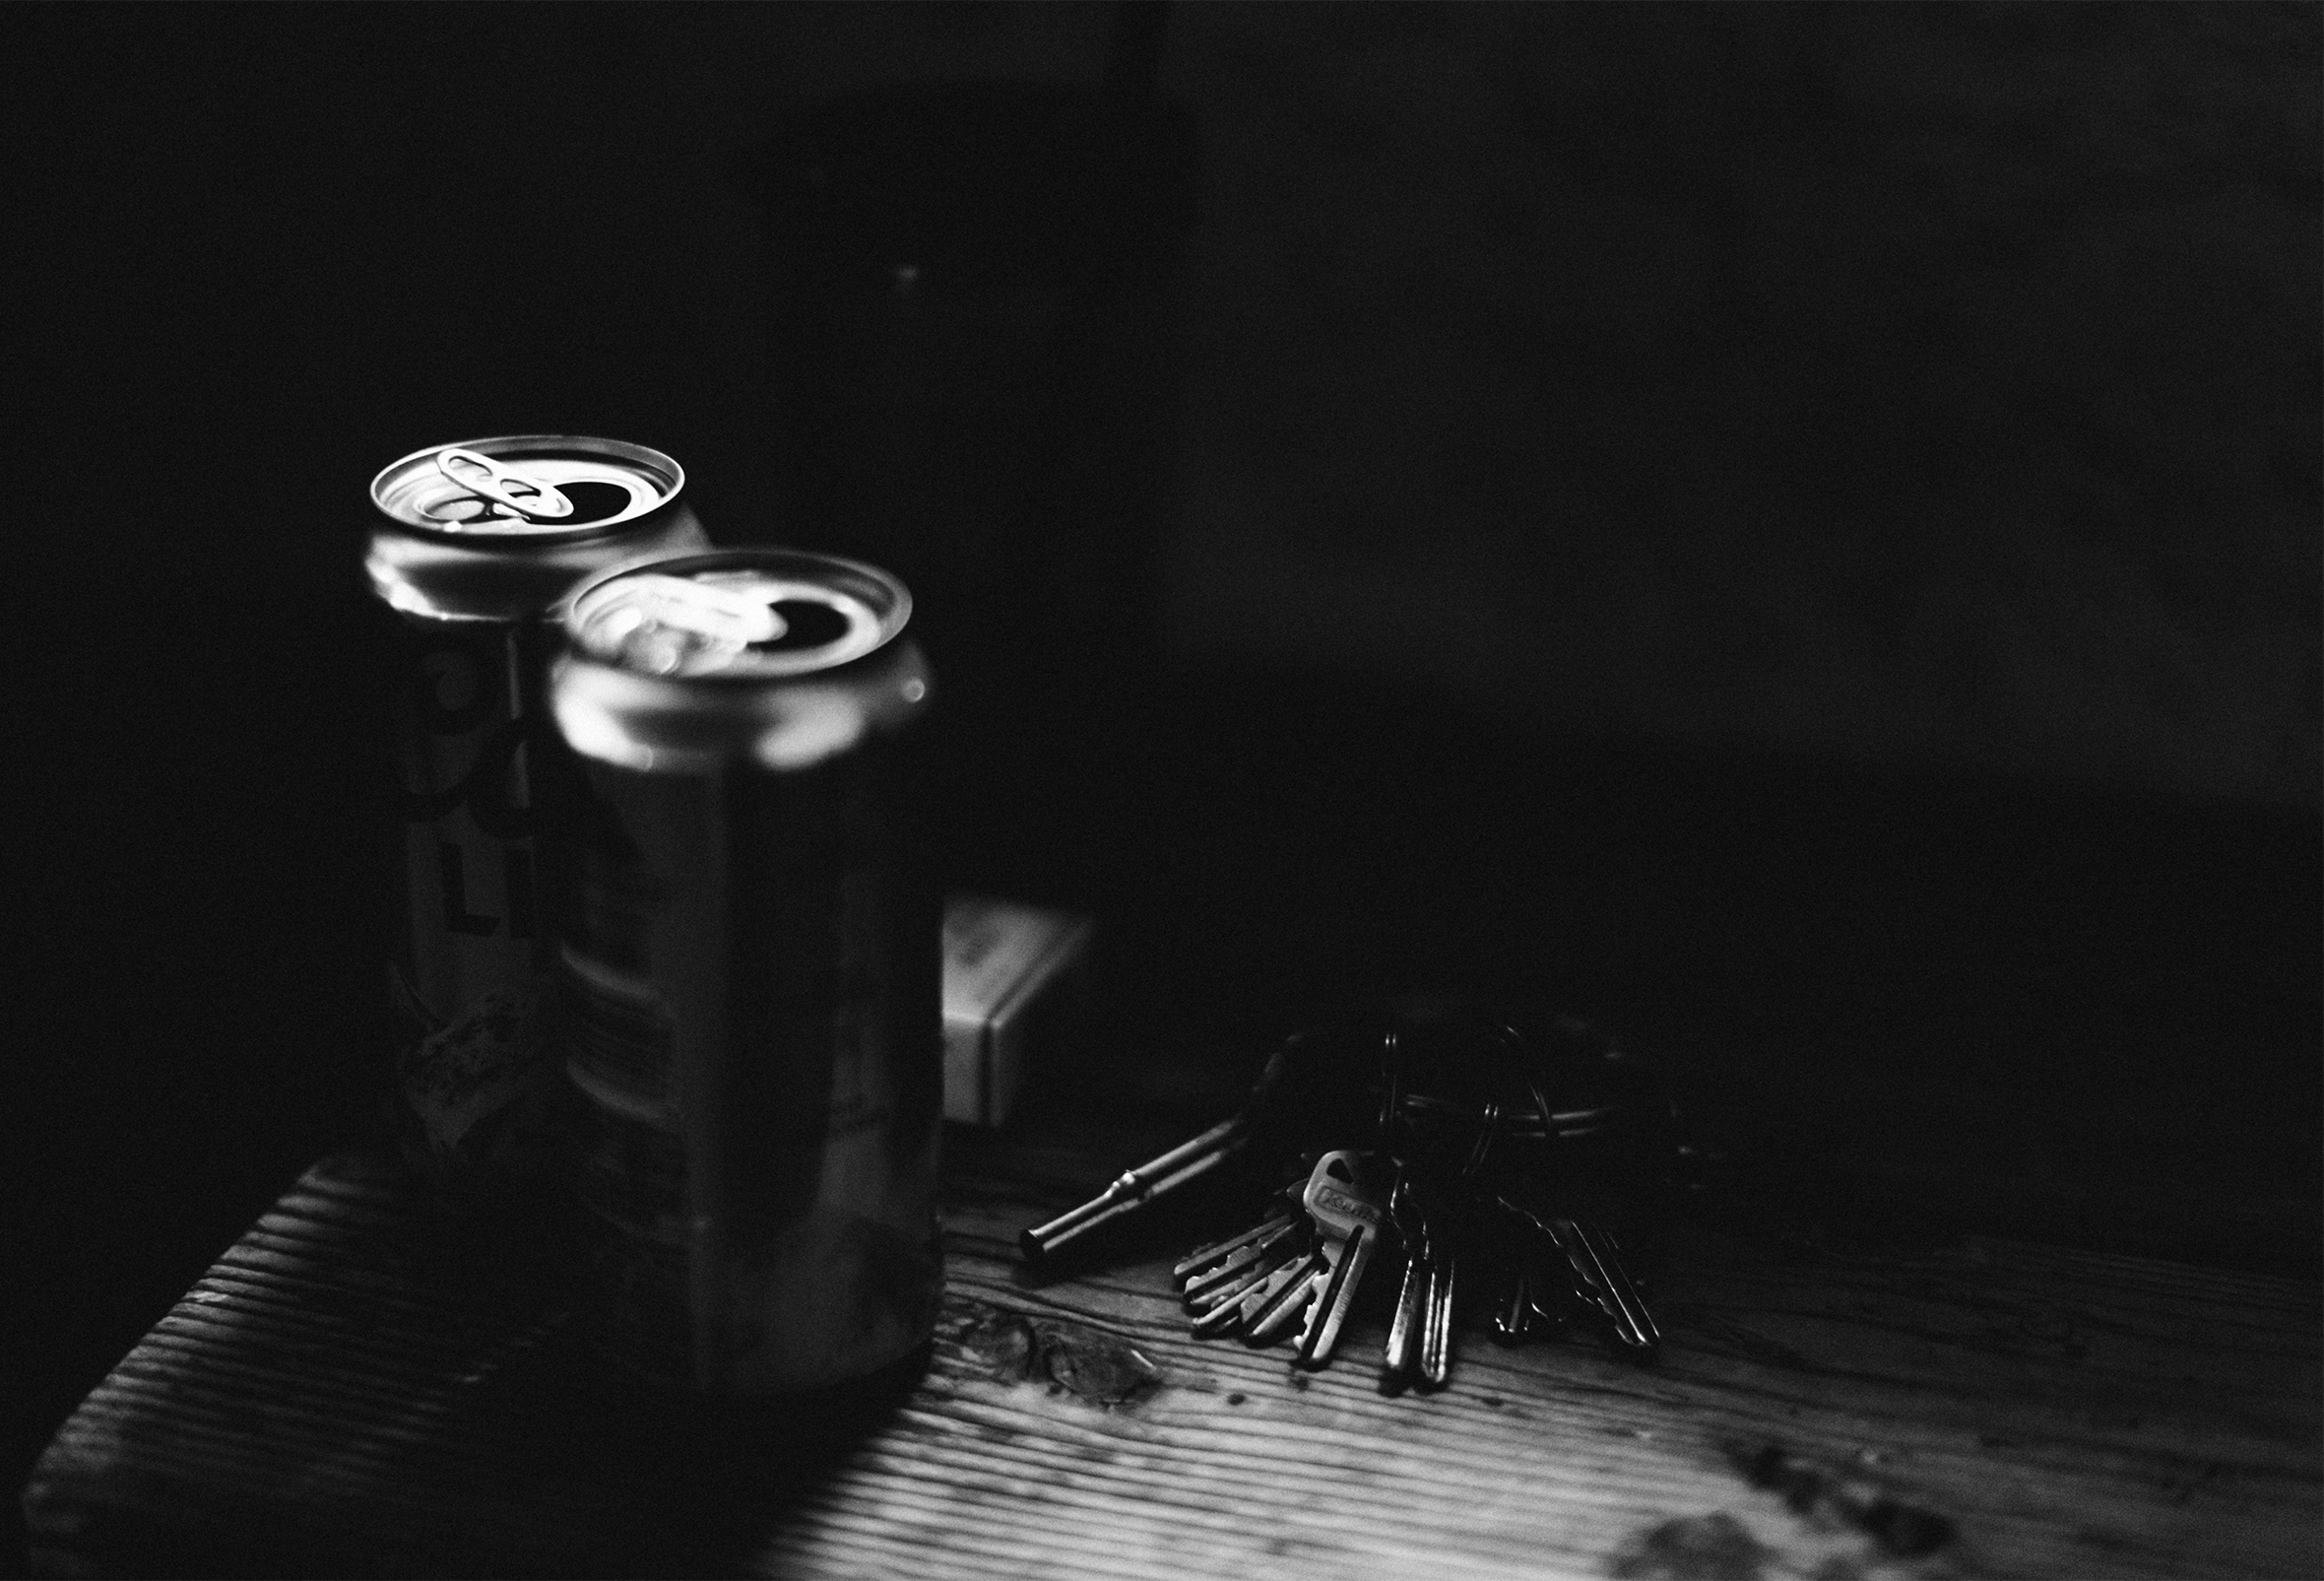 The corner of a wooden table upon which are two open beer cans with a pack of cigarettes peeking out from behind them and a plain metal keyring with many keys. The table is in a darkened room and the objects on the table are mostly in shadow.